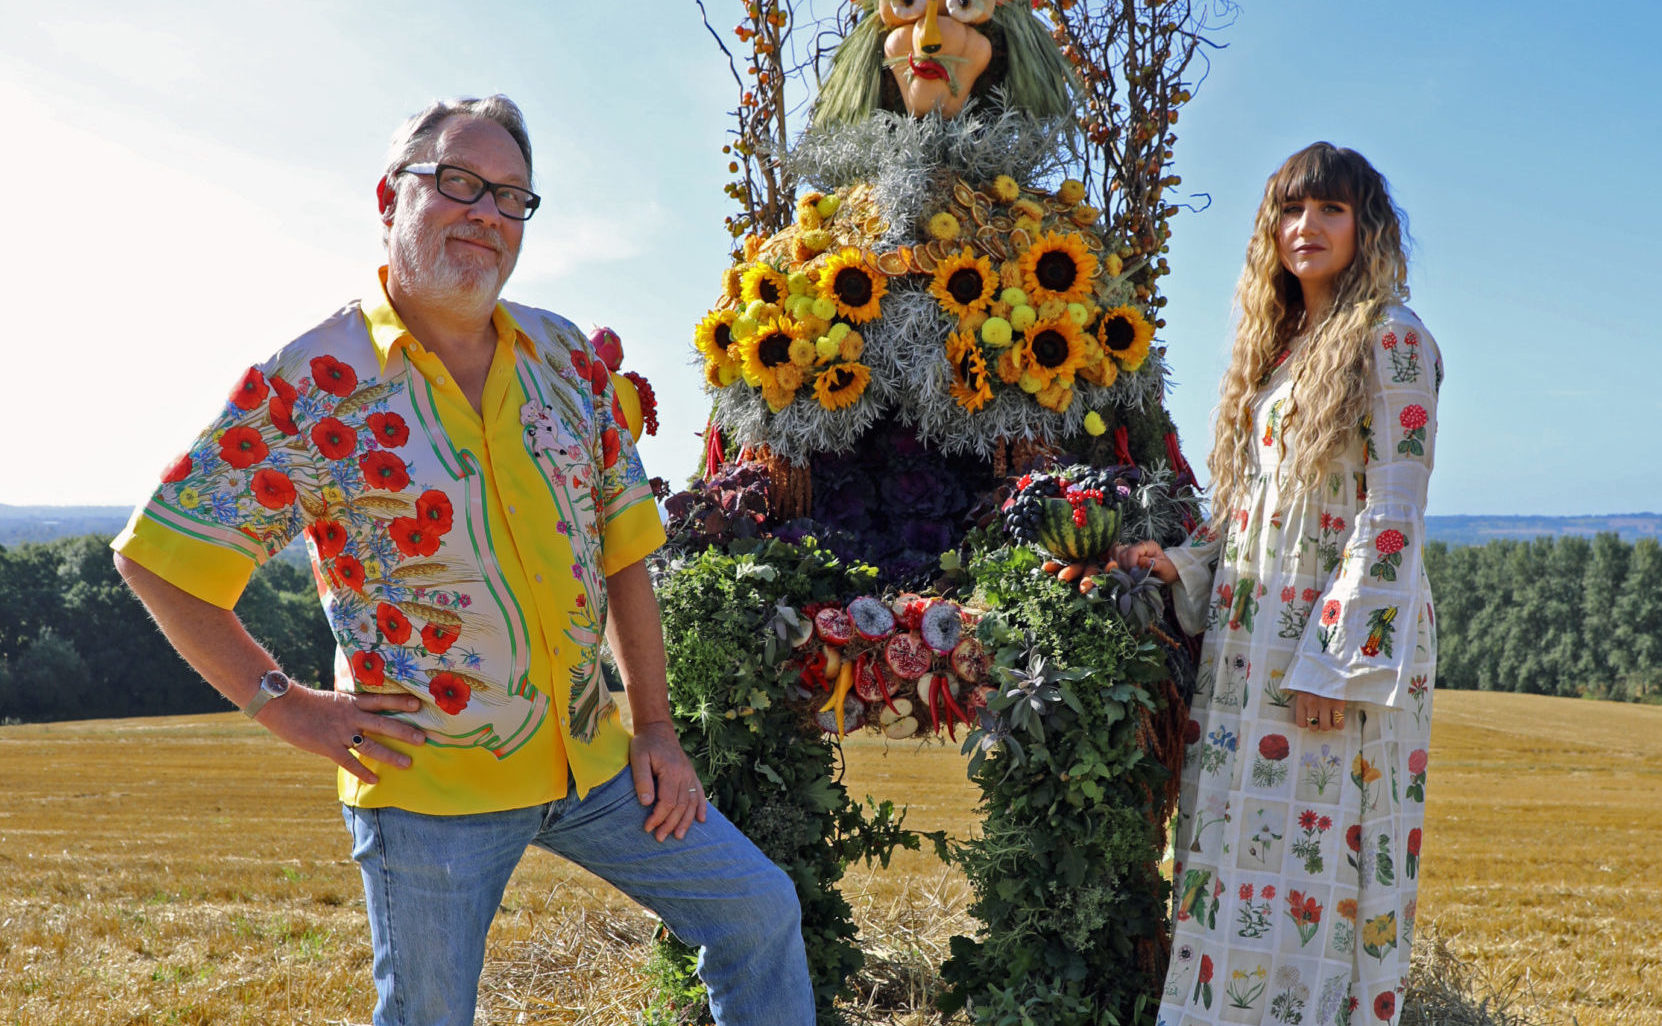 Vic Reeves and Natasia Demetriou present The Big Flower Fight on Netflix